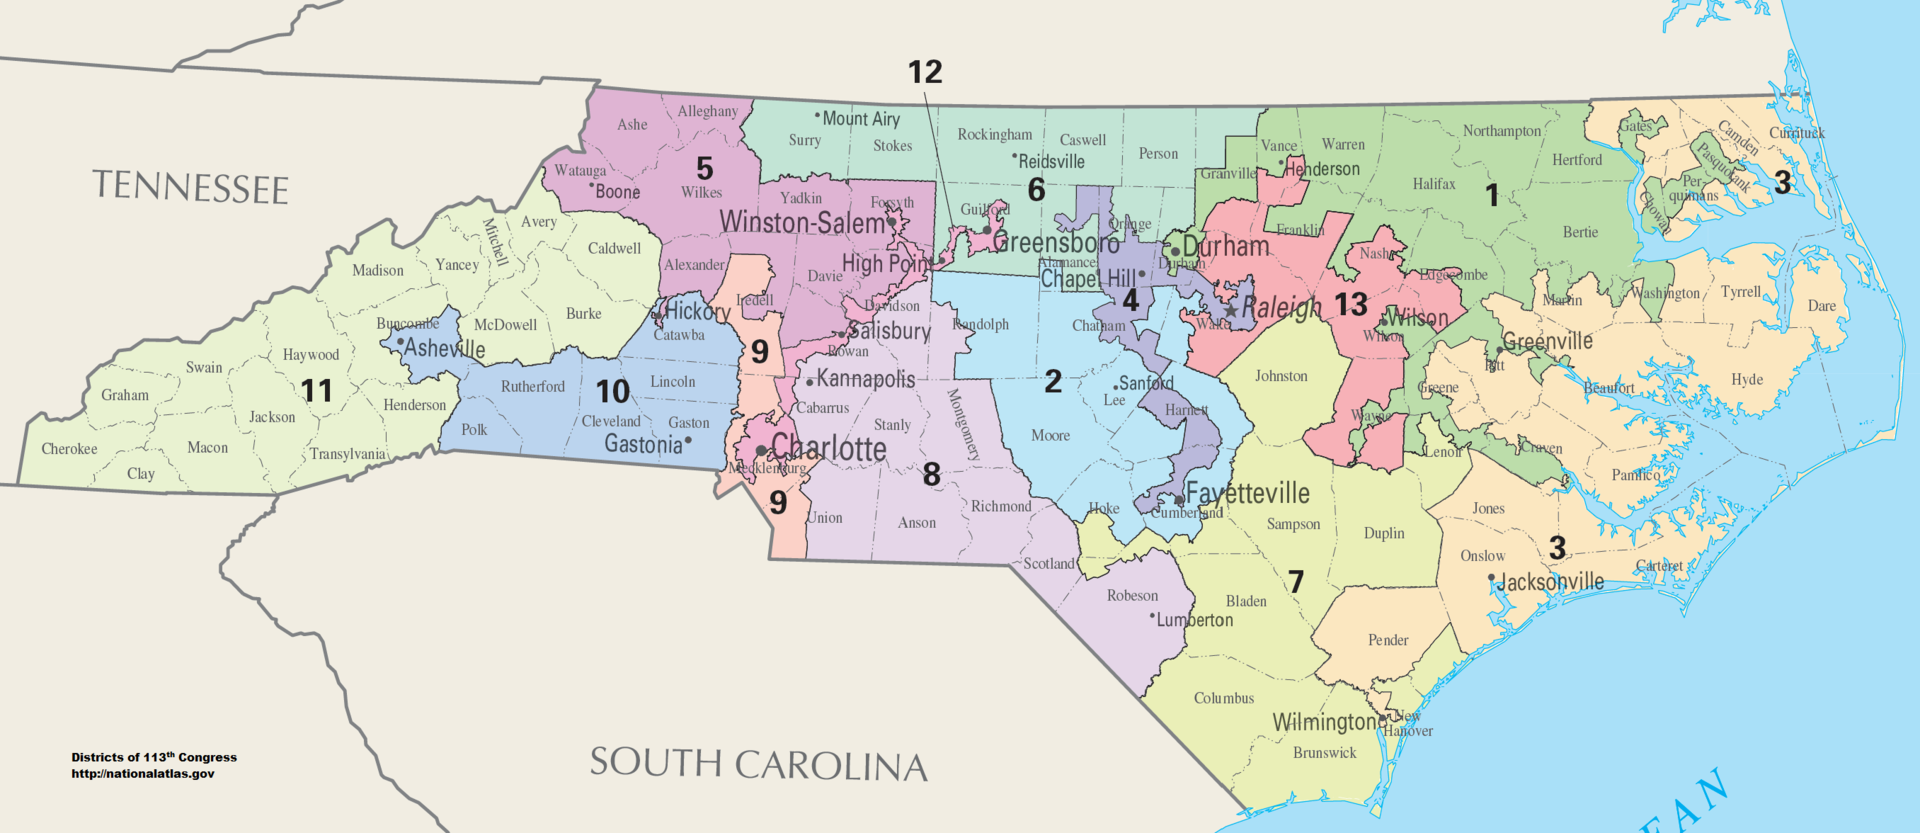 Federal court rules North Carolina can use unconstitutional map for November election